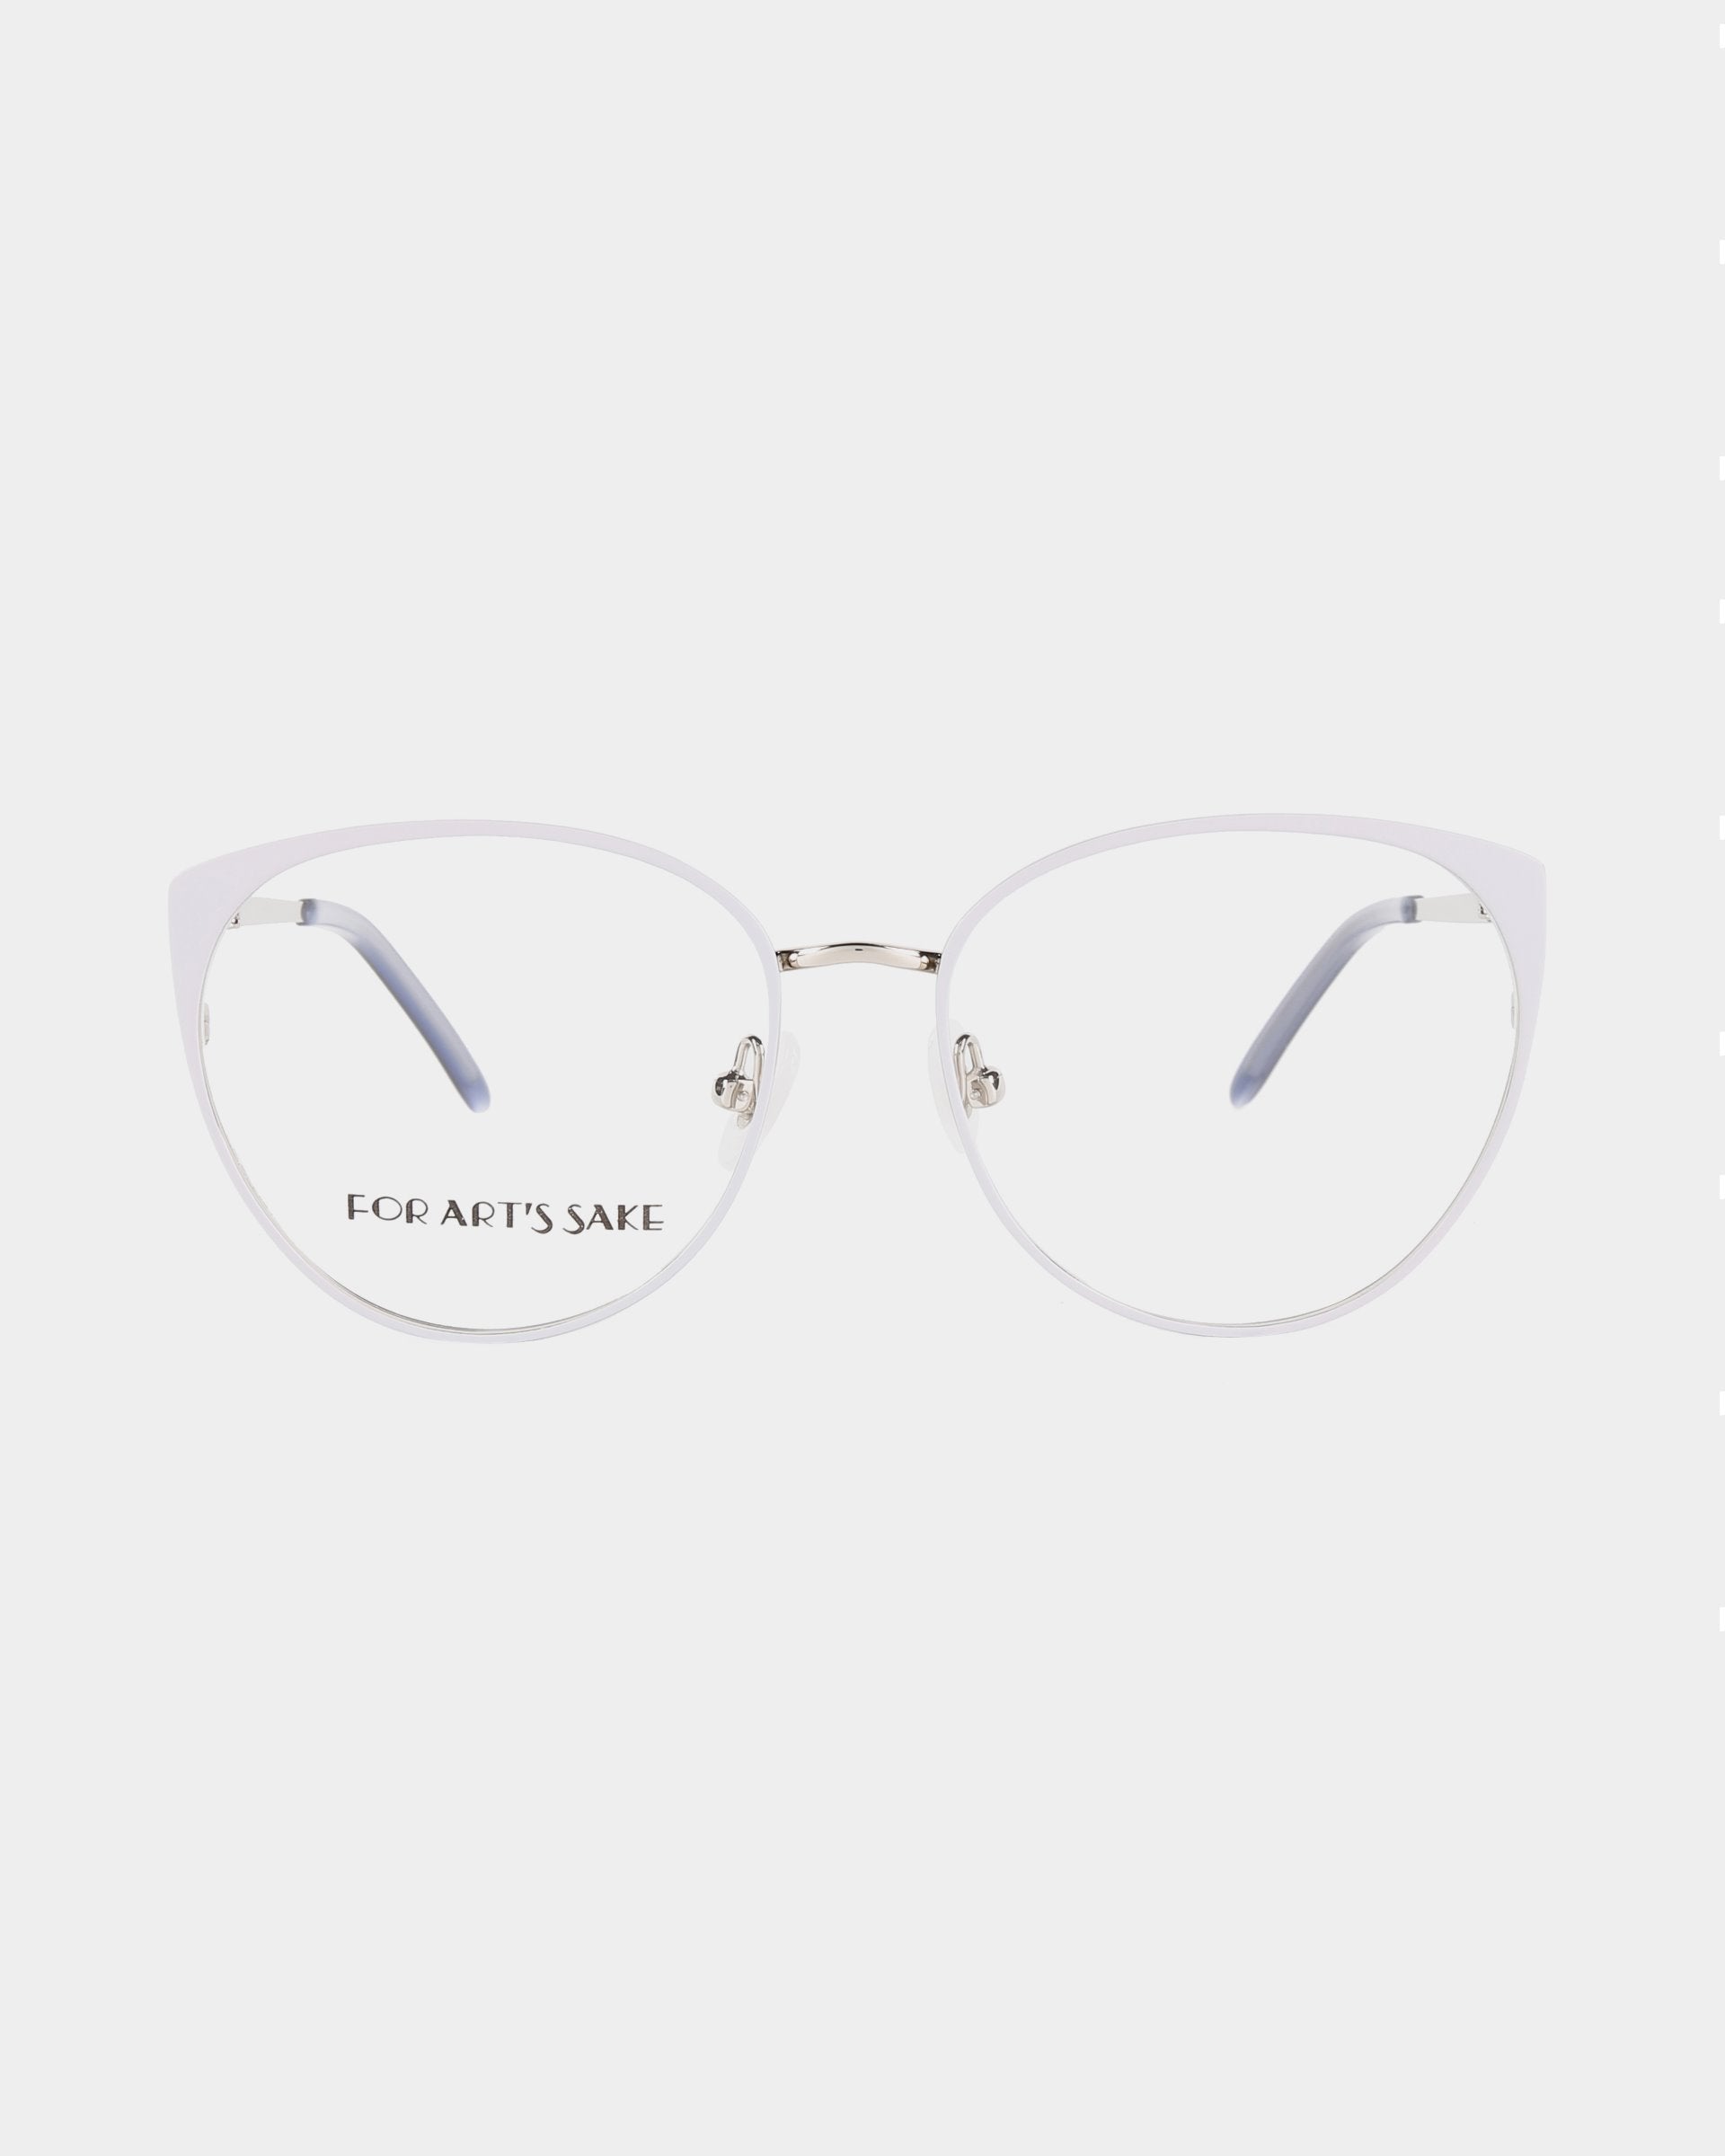 A pair of Kaia glasses by For Art&#39;s Sake® with thin, translucent frames and clear lenses that feature a blue light filter. The temples are silver with black tips, adding a touch of elegance. The left lens has the text &quot;FOR ART&#39;S SAKE&quot; printed on it, against a plain white background.